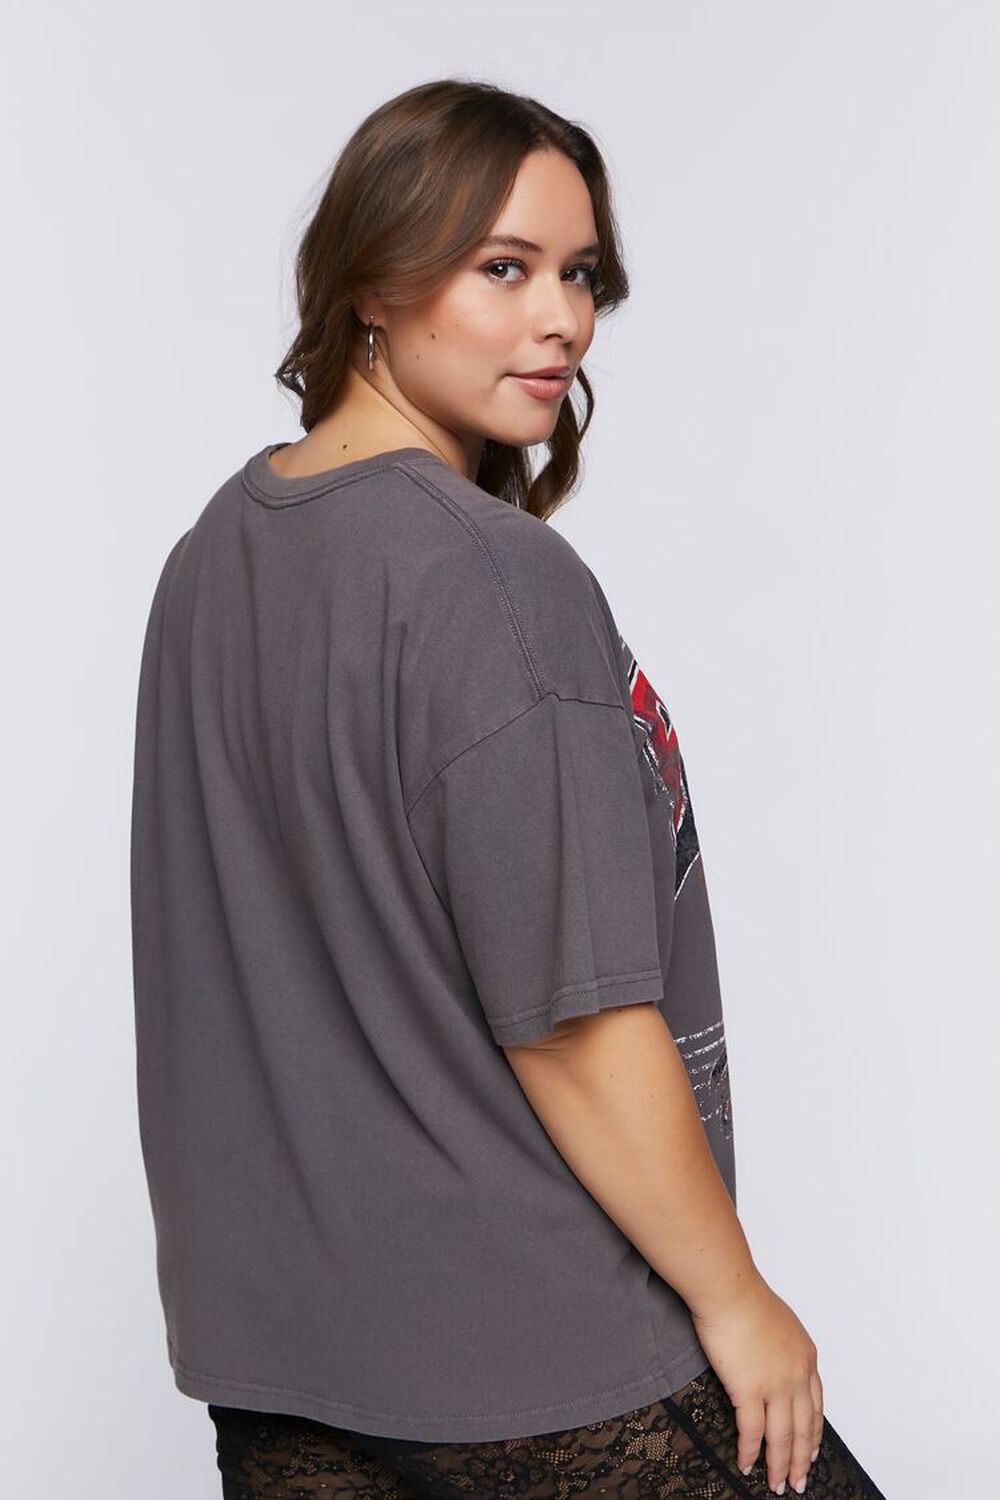 CHARCOAL/MULTI Plus Size Chicago Bulls Graphic Tee, image 3